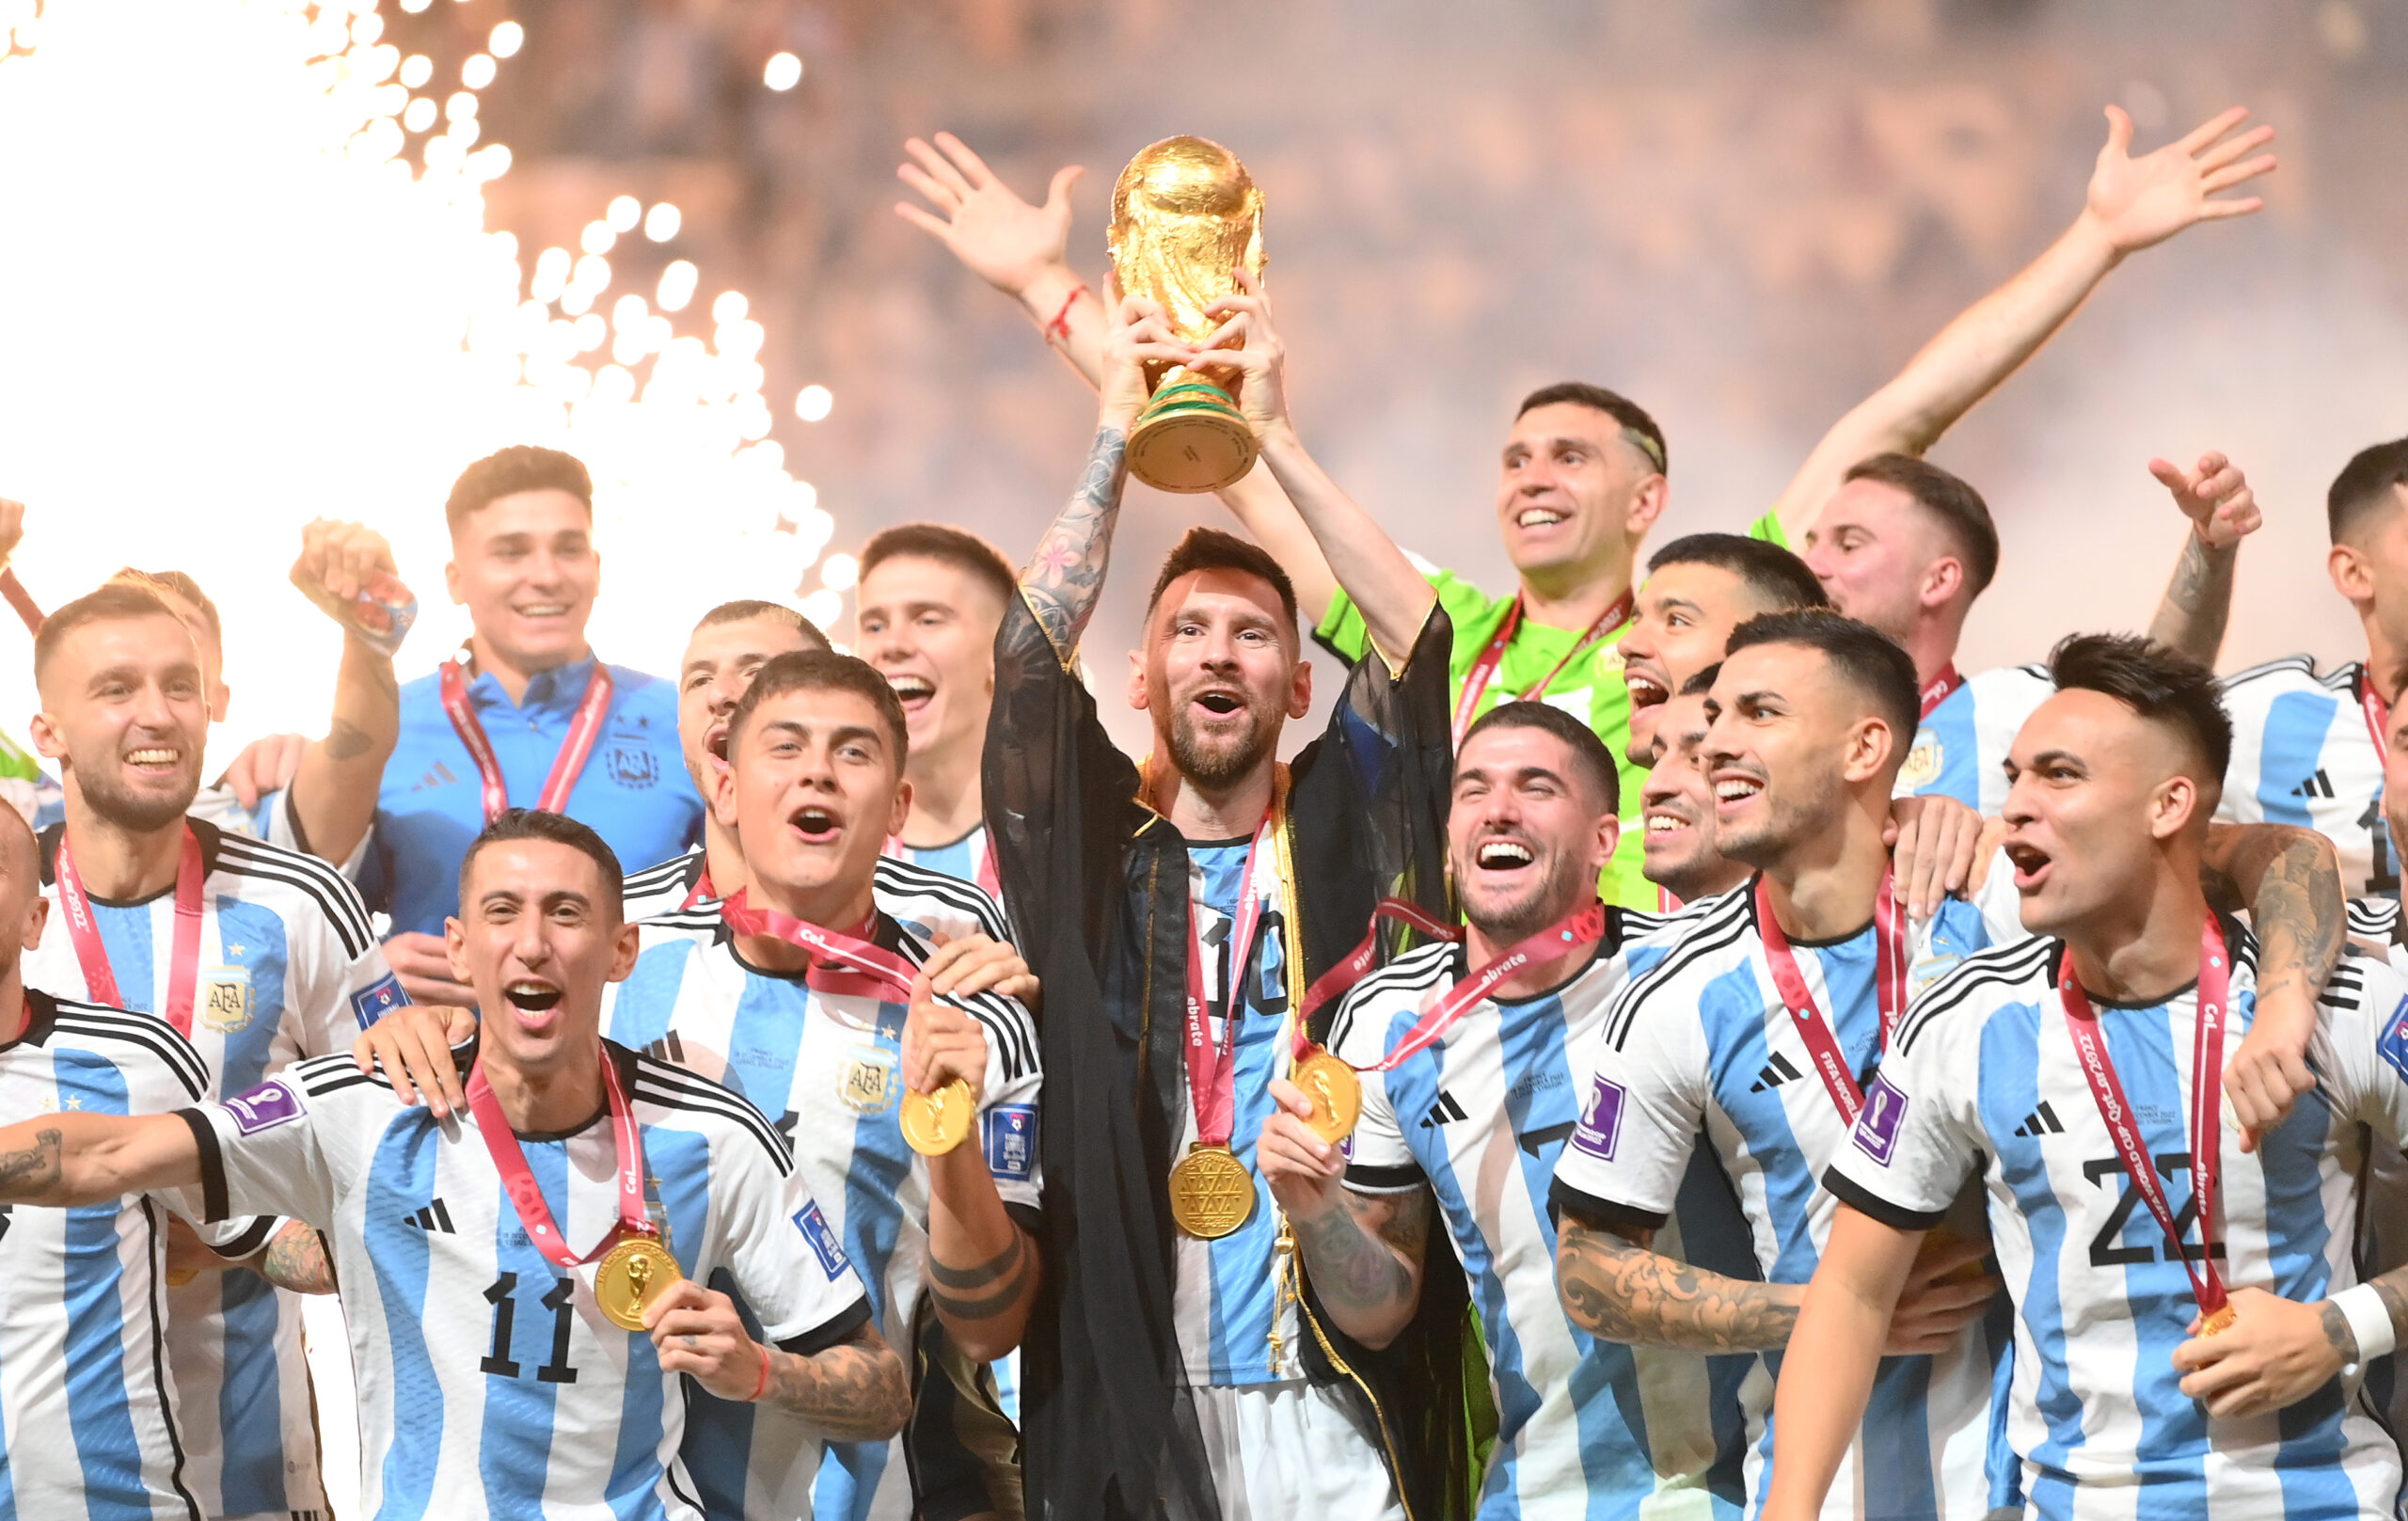 Juventus already held the record for most World Cup champions before the recent edition. Angel Di Maria and Leandro Paredes joined the list.